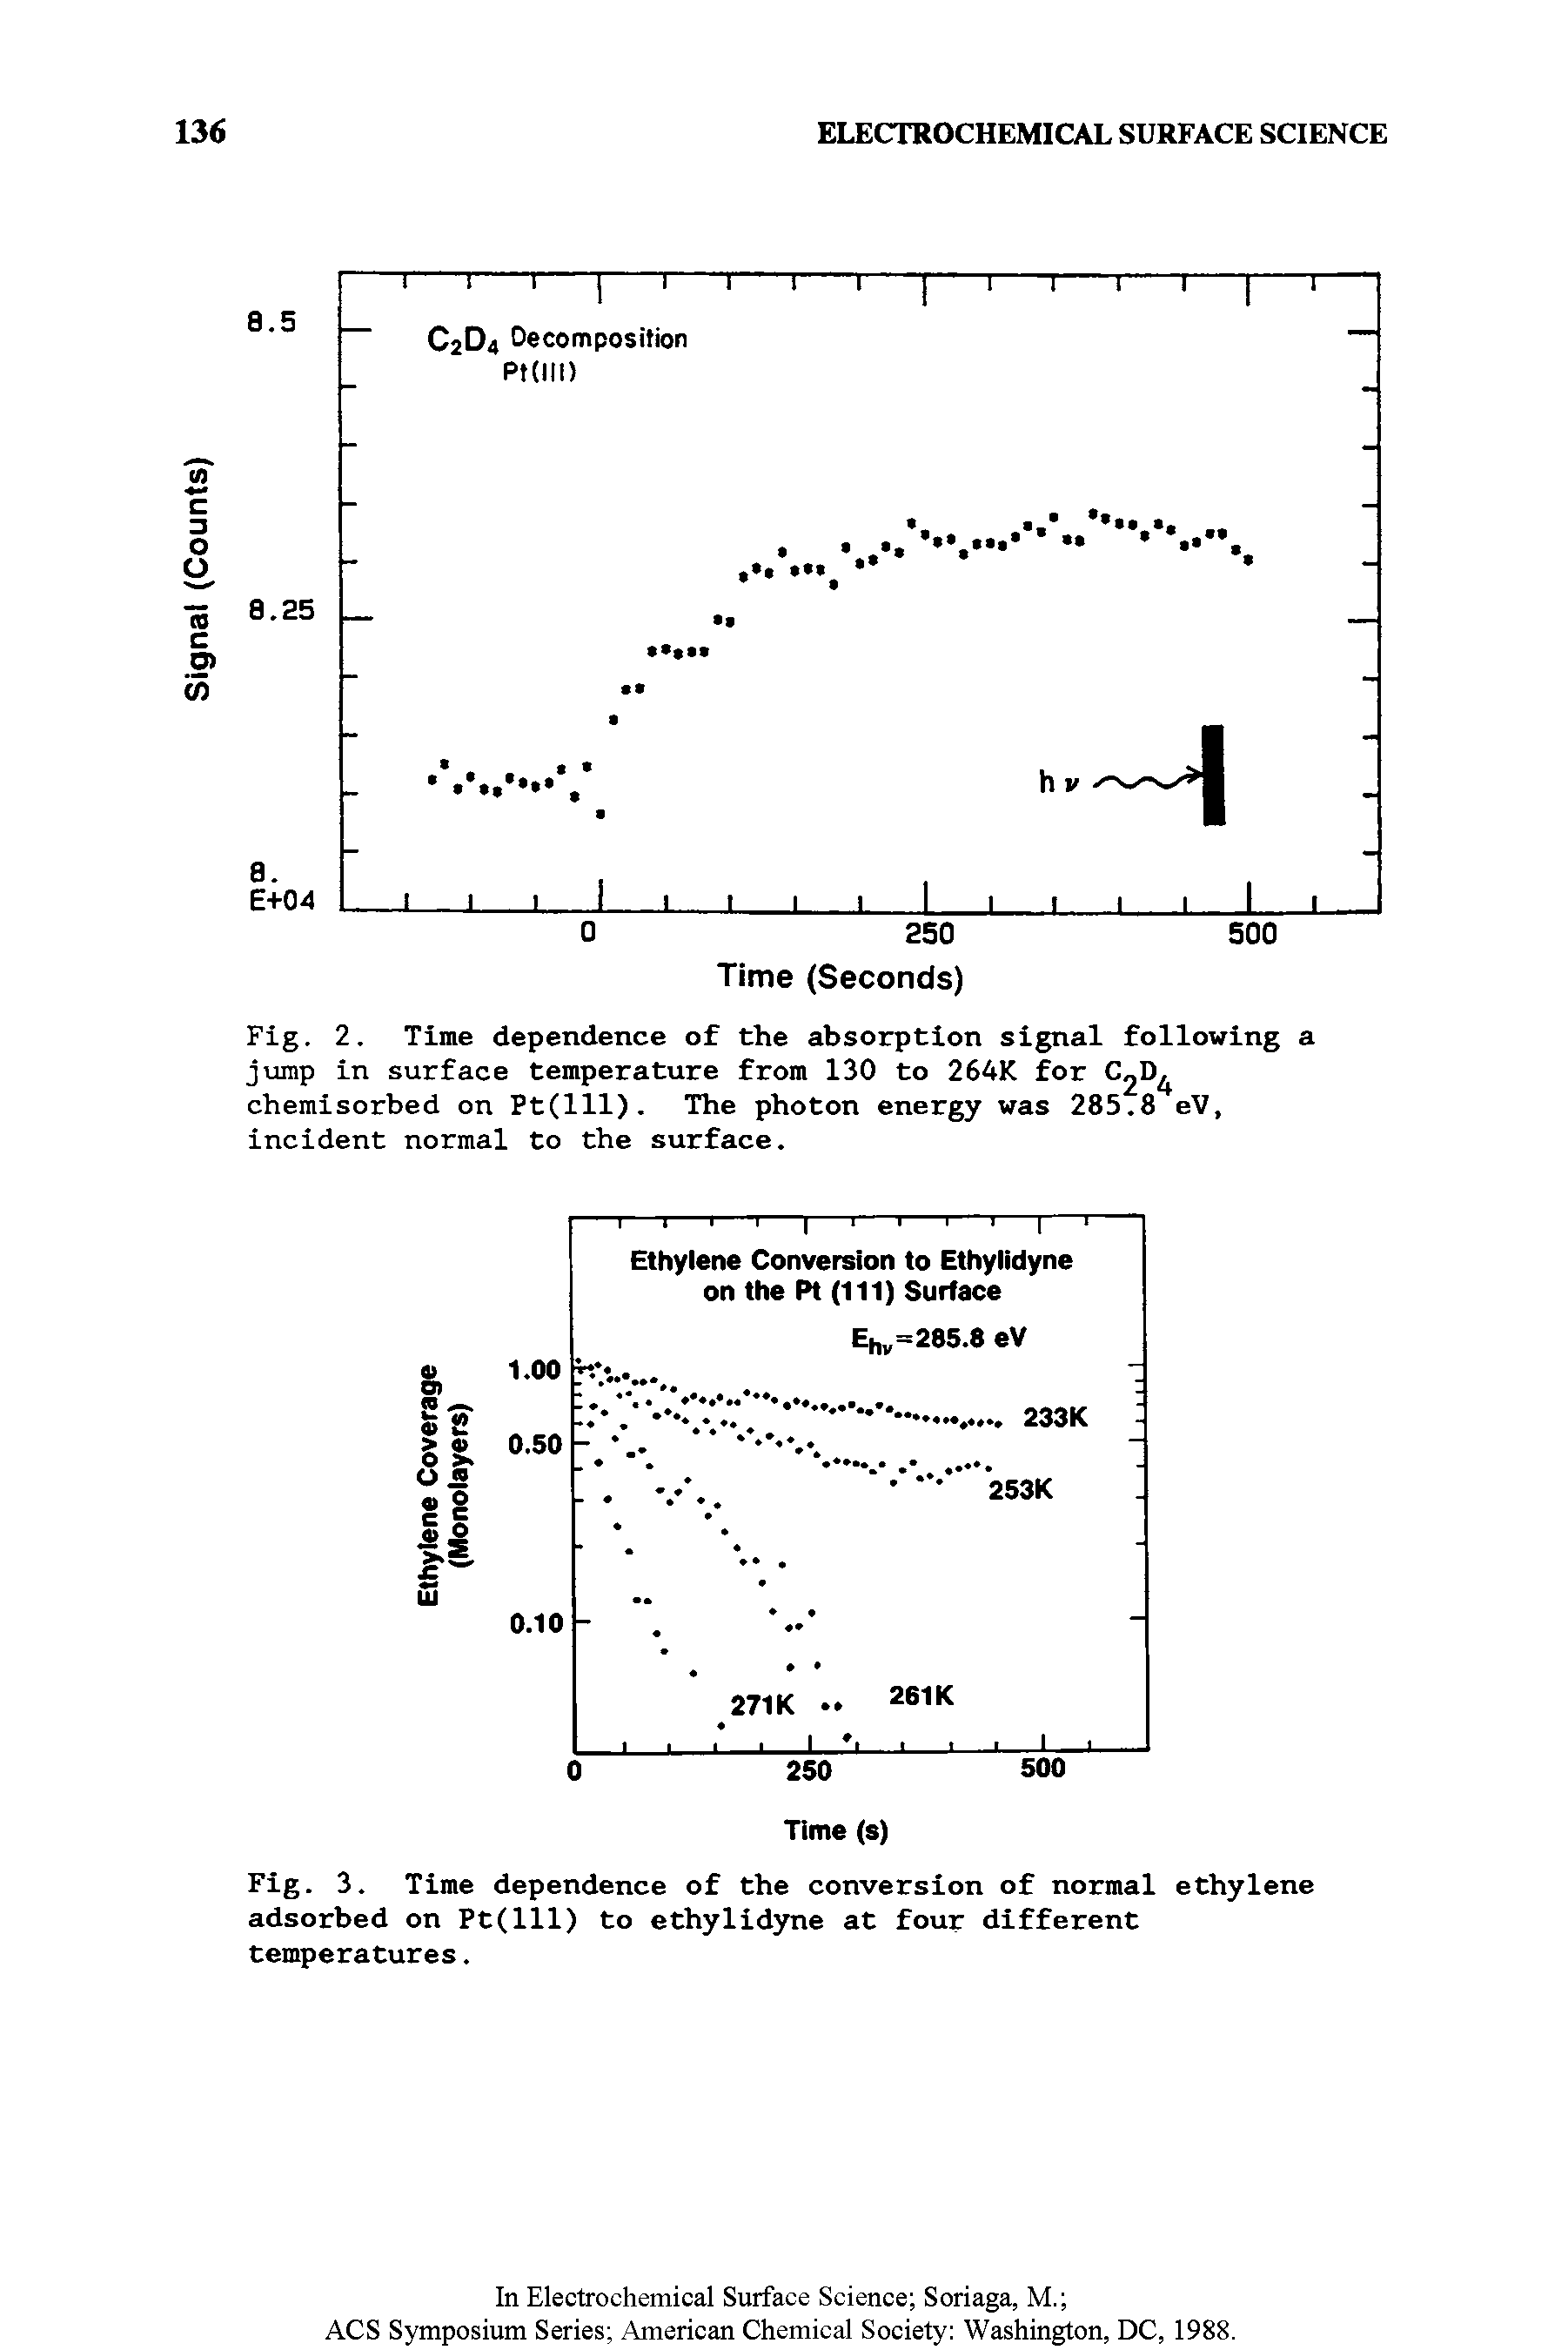 Fig. 3. Time dependence of the conversion of normal ethylene adsorbed on Pt(lll) to ethylidyne at four different temperatures.